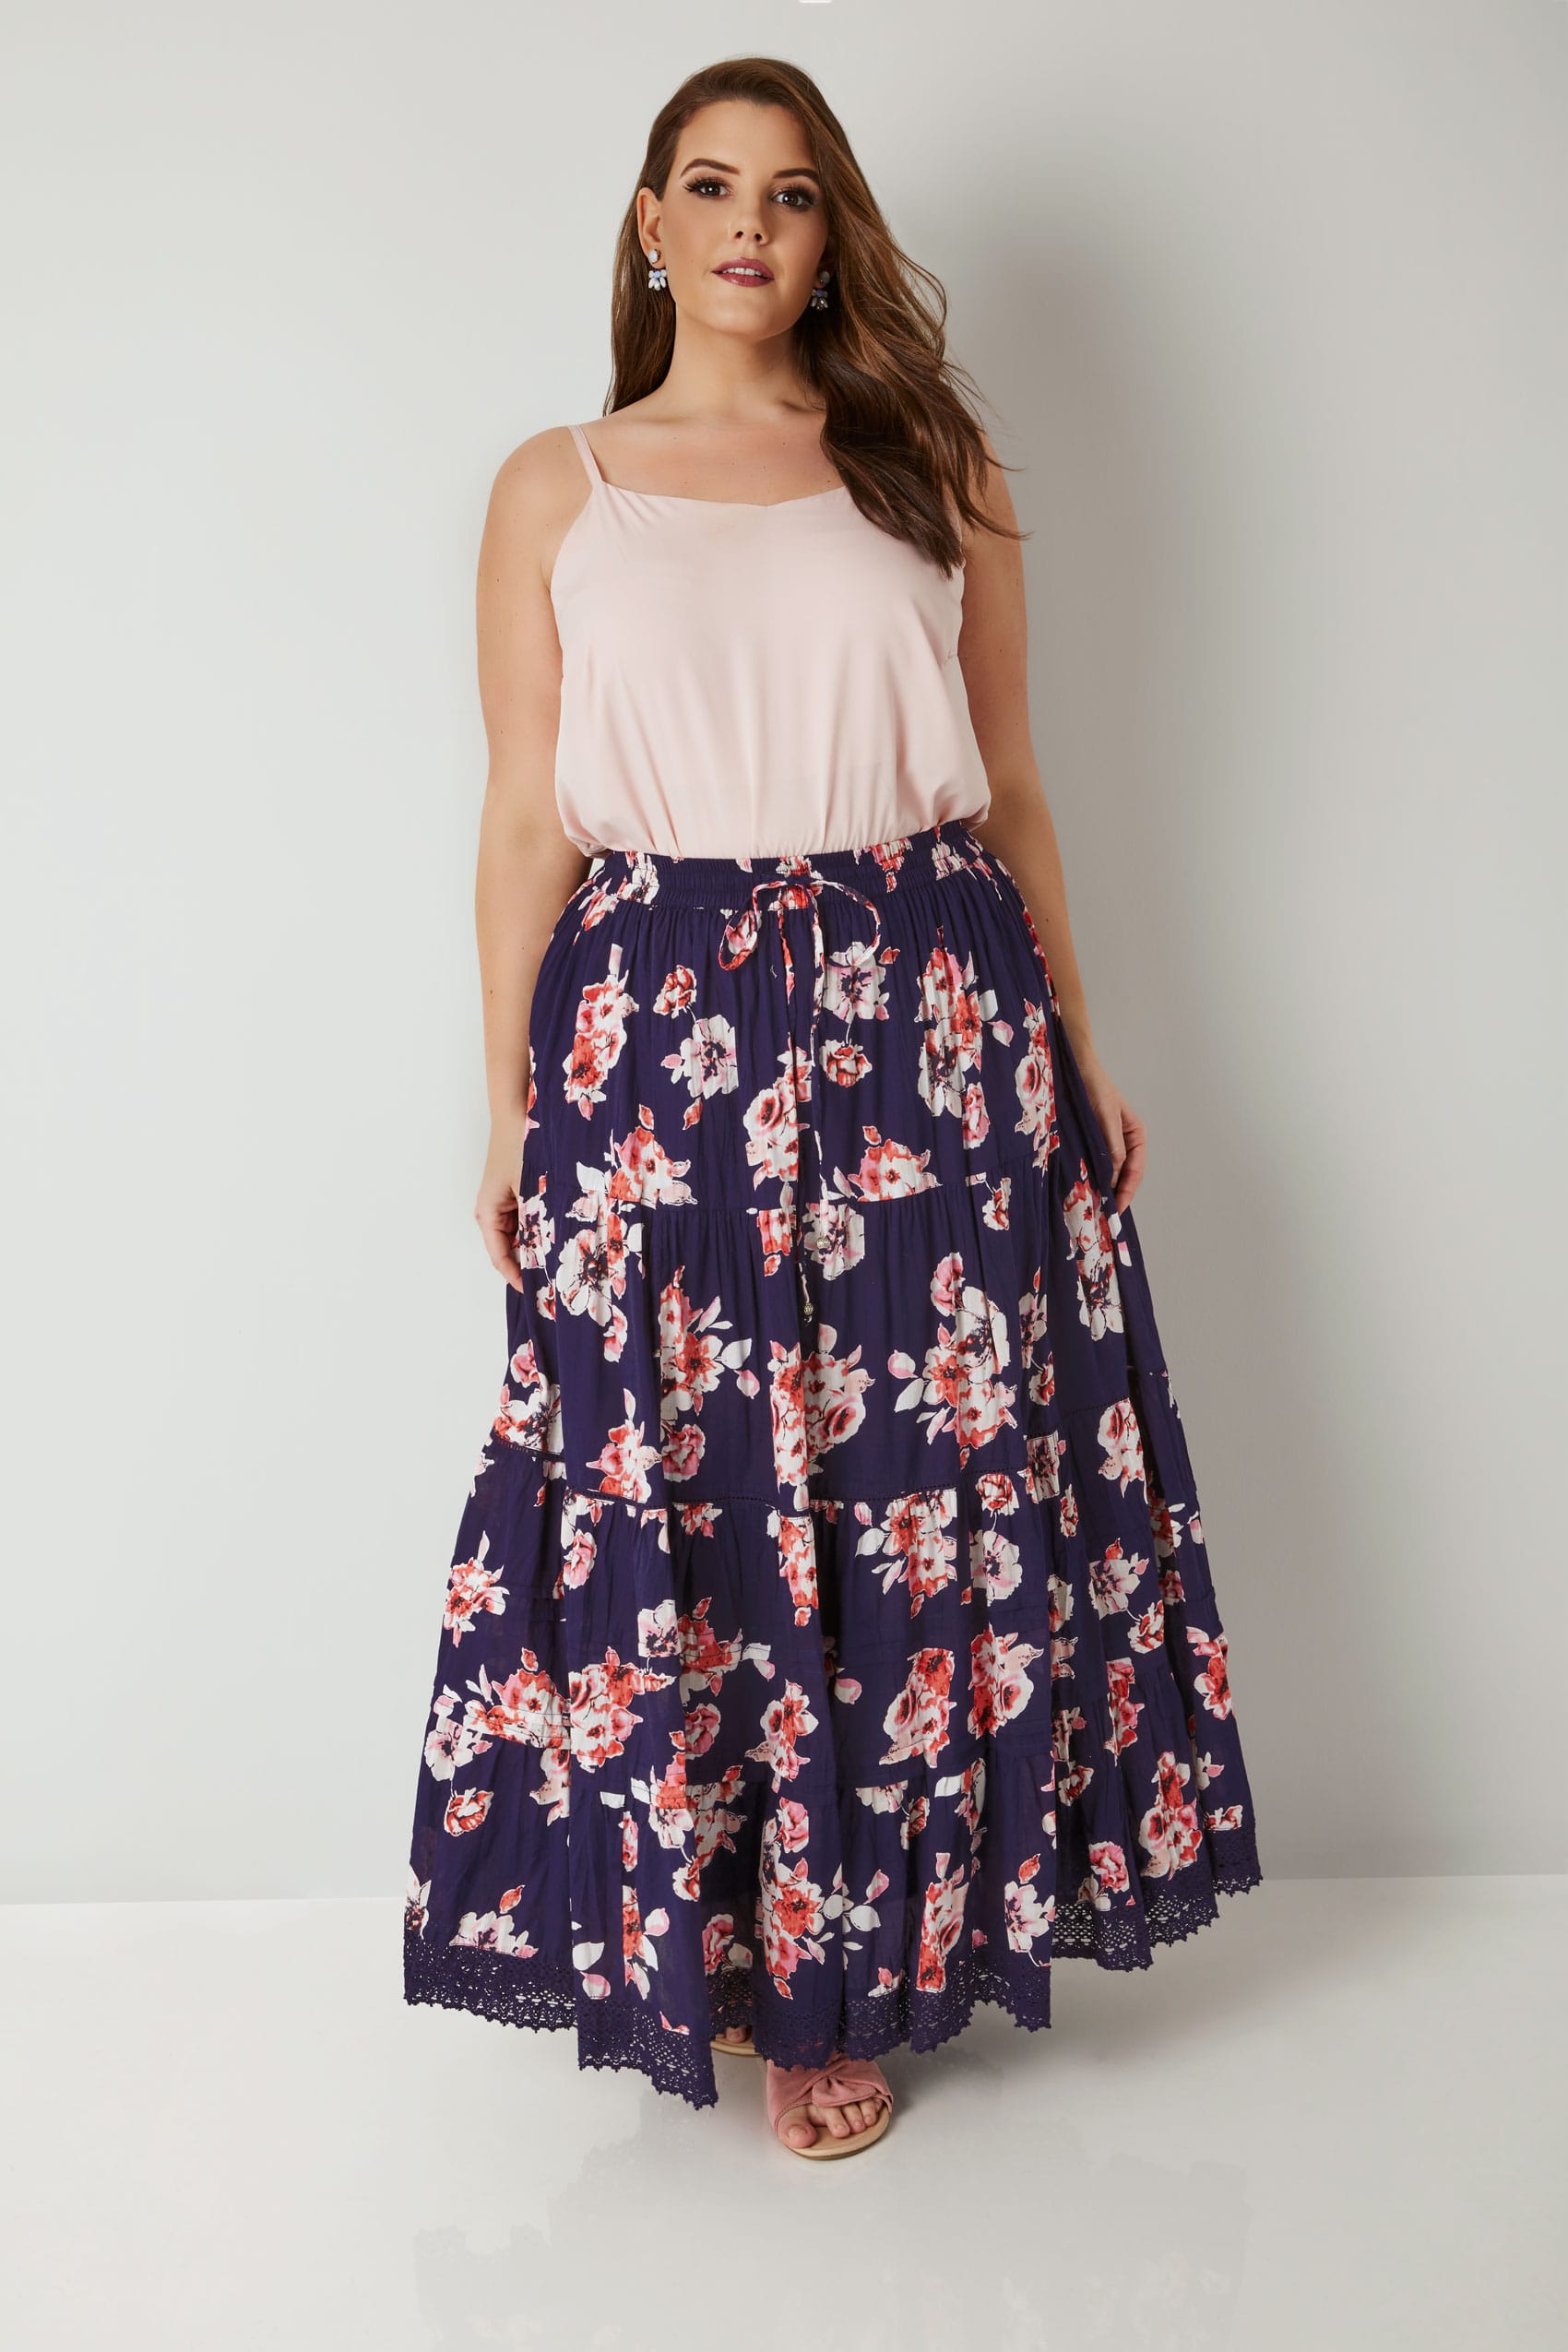 Navy And Pink Floral Print Tiered Maxi Skirt With Lace Trim Hem Plus Size 16 To 36